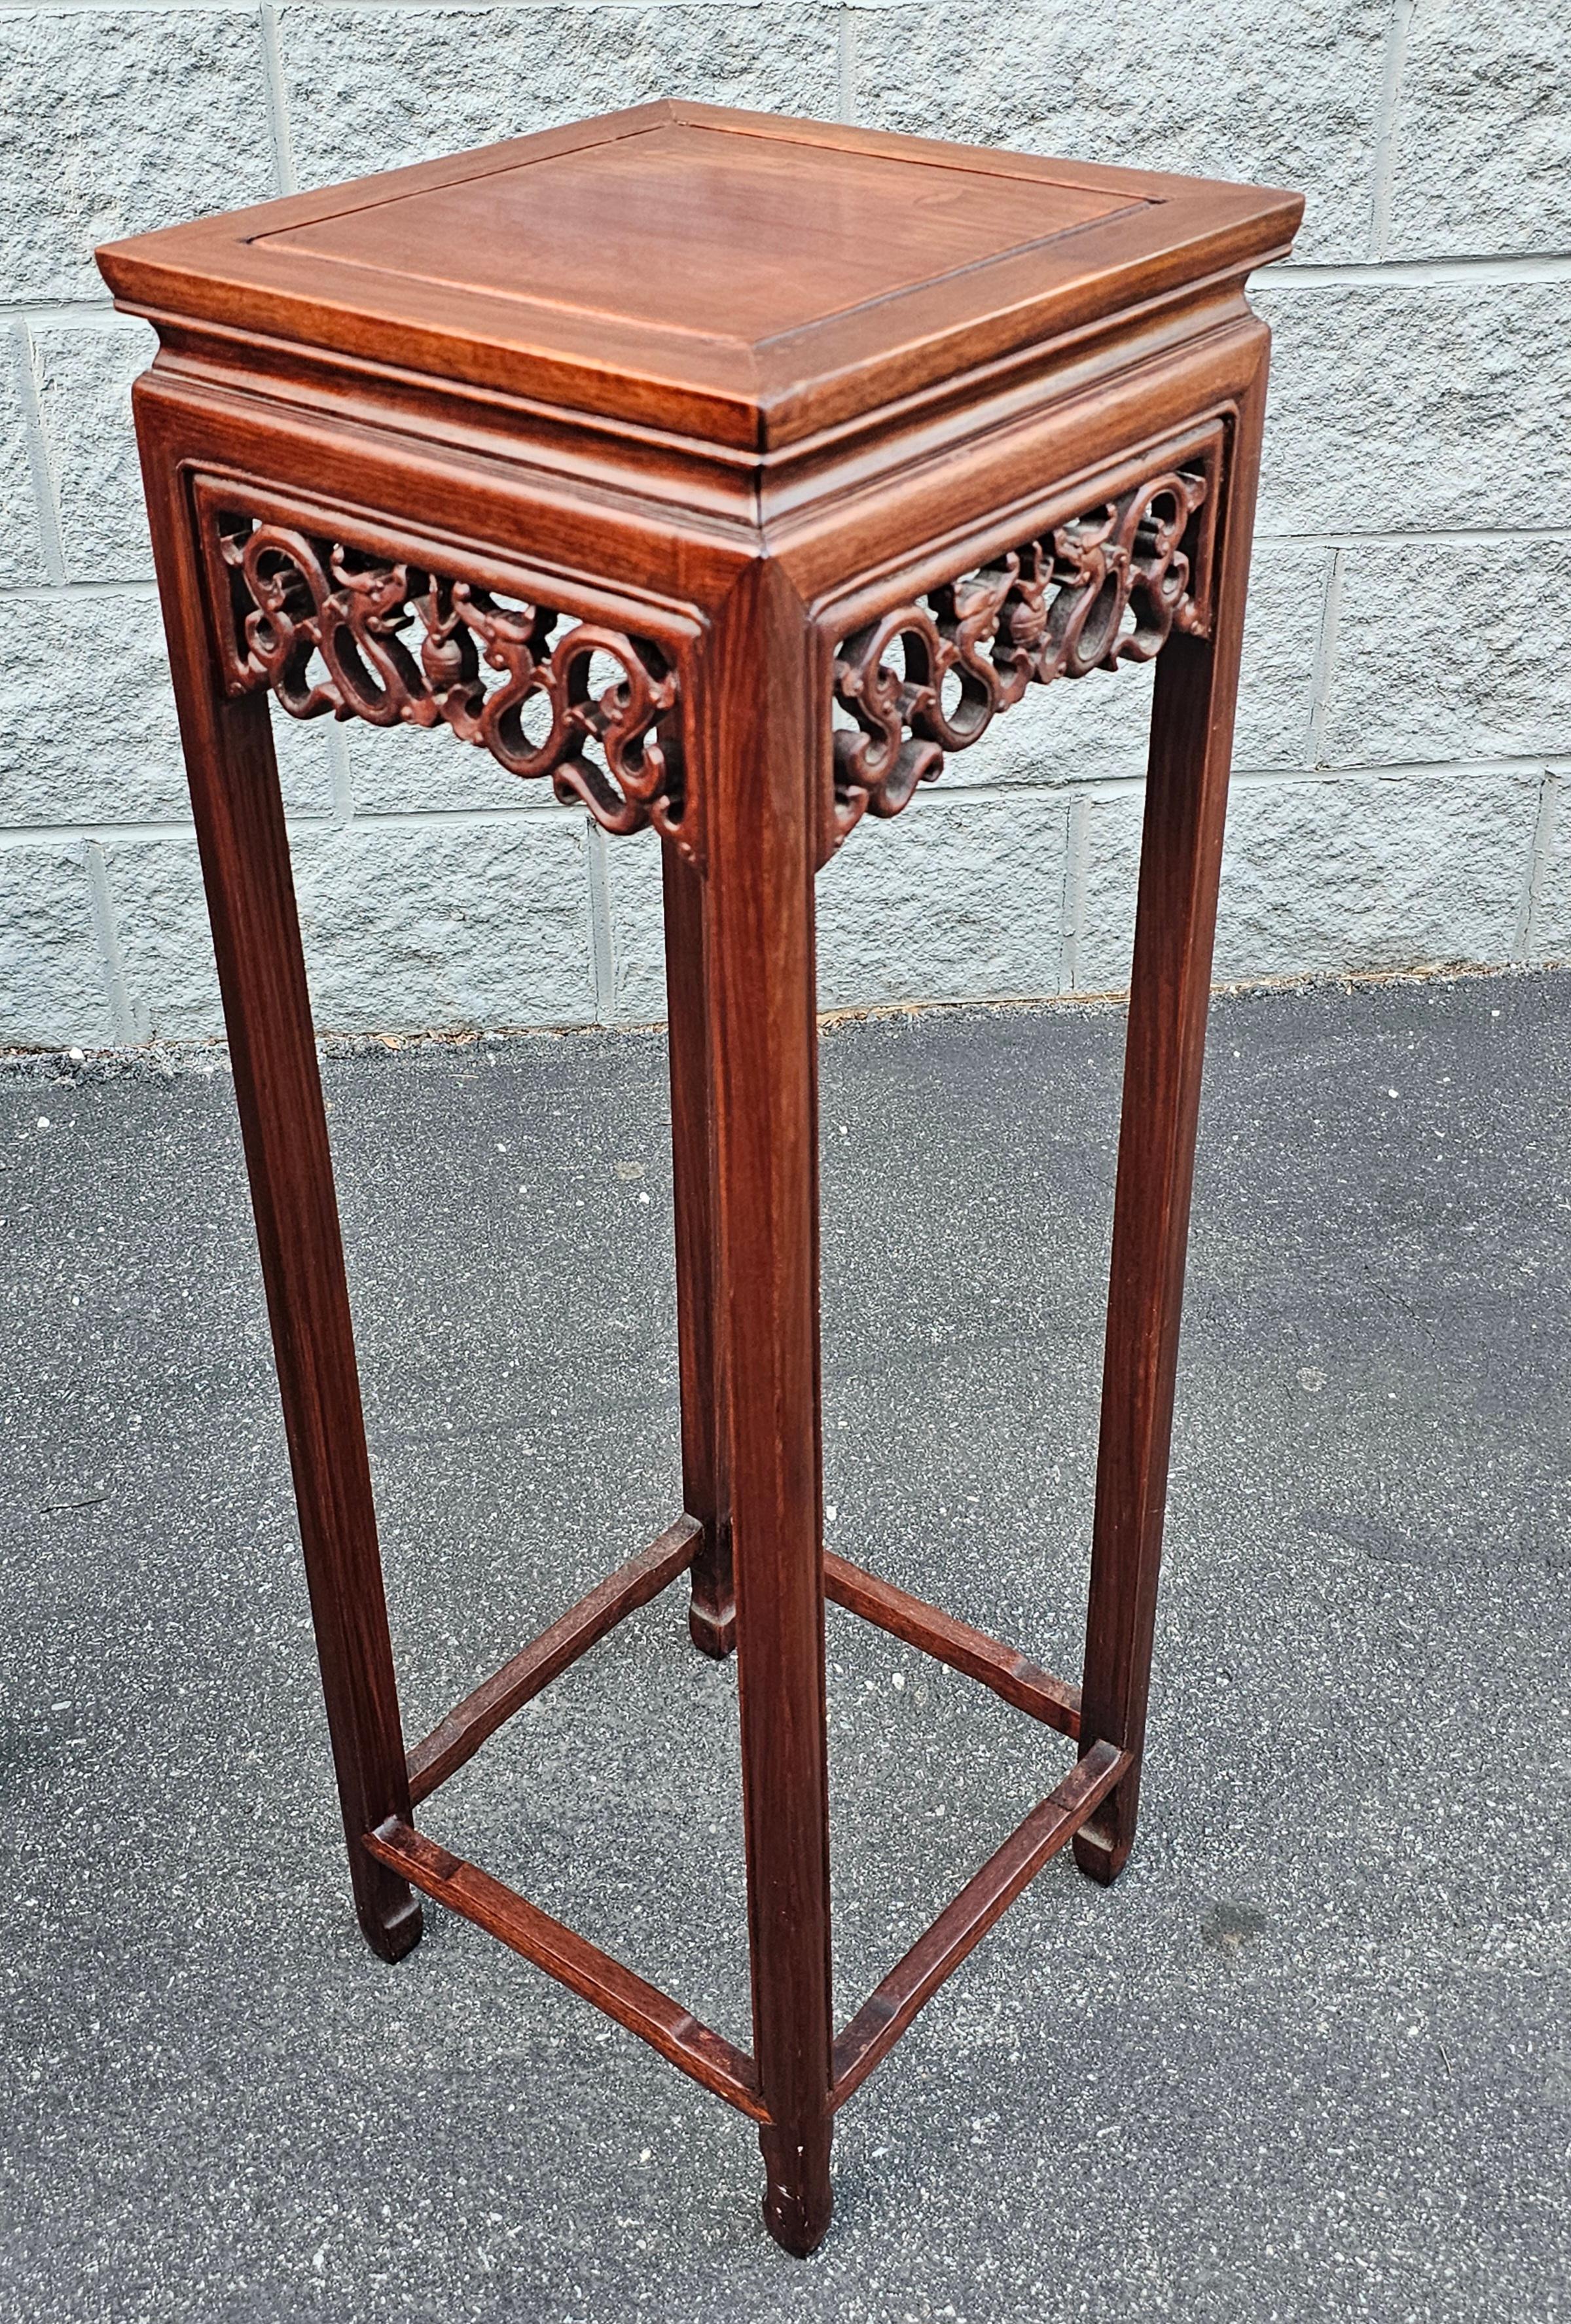 Carved Pair of Chinese Hongmu Stands Pedestals / Plant Stands For Sale